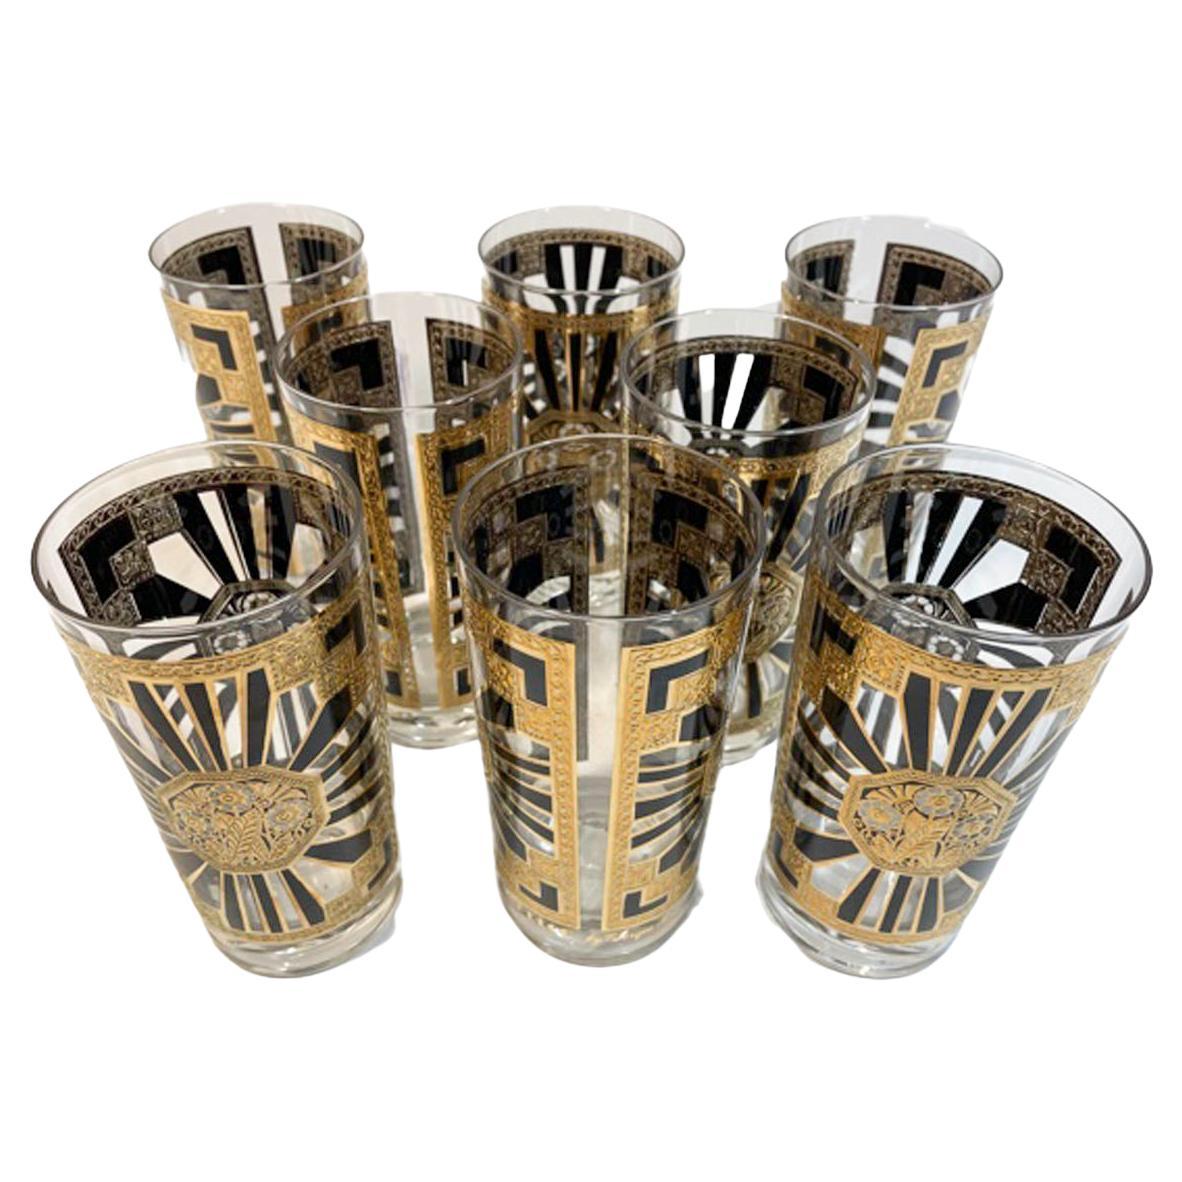 Vintage Set of 8 Georges Briard Highball Glasses in the Art Deco Pattern